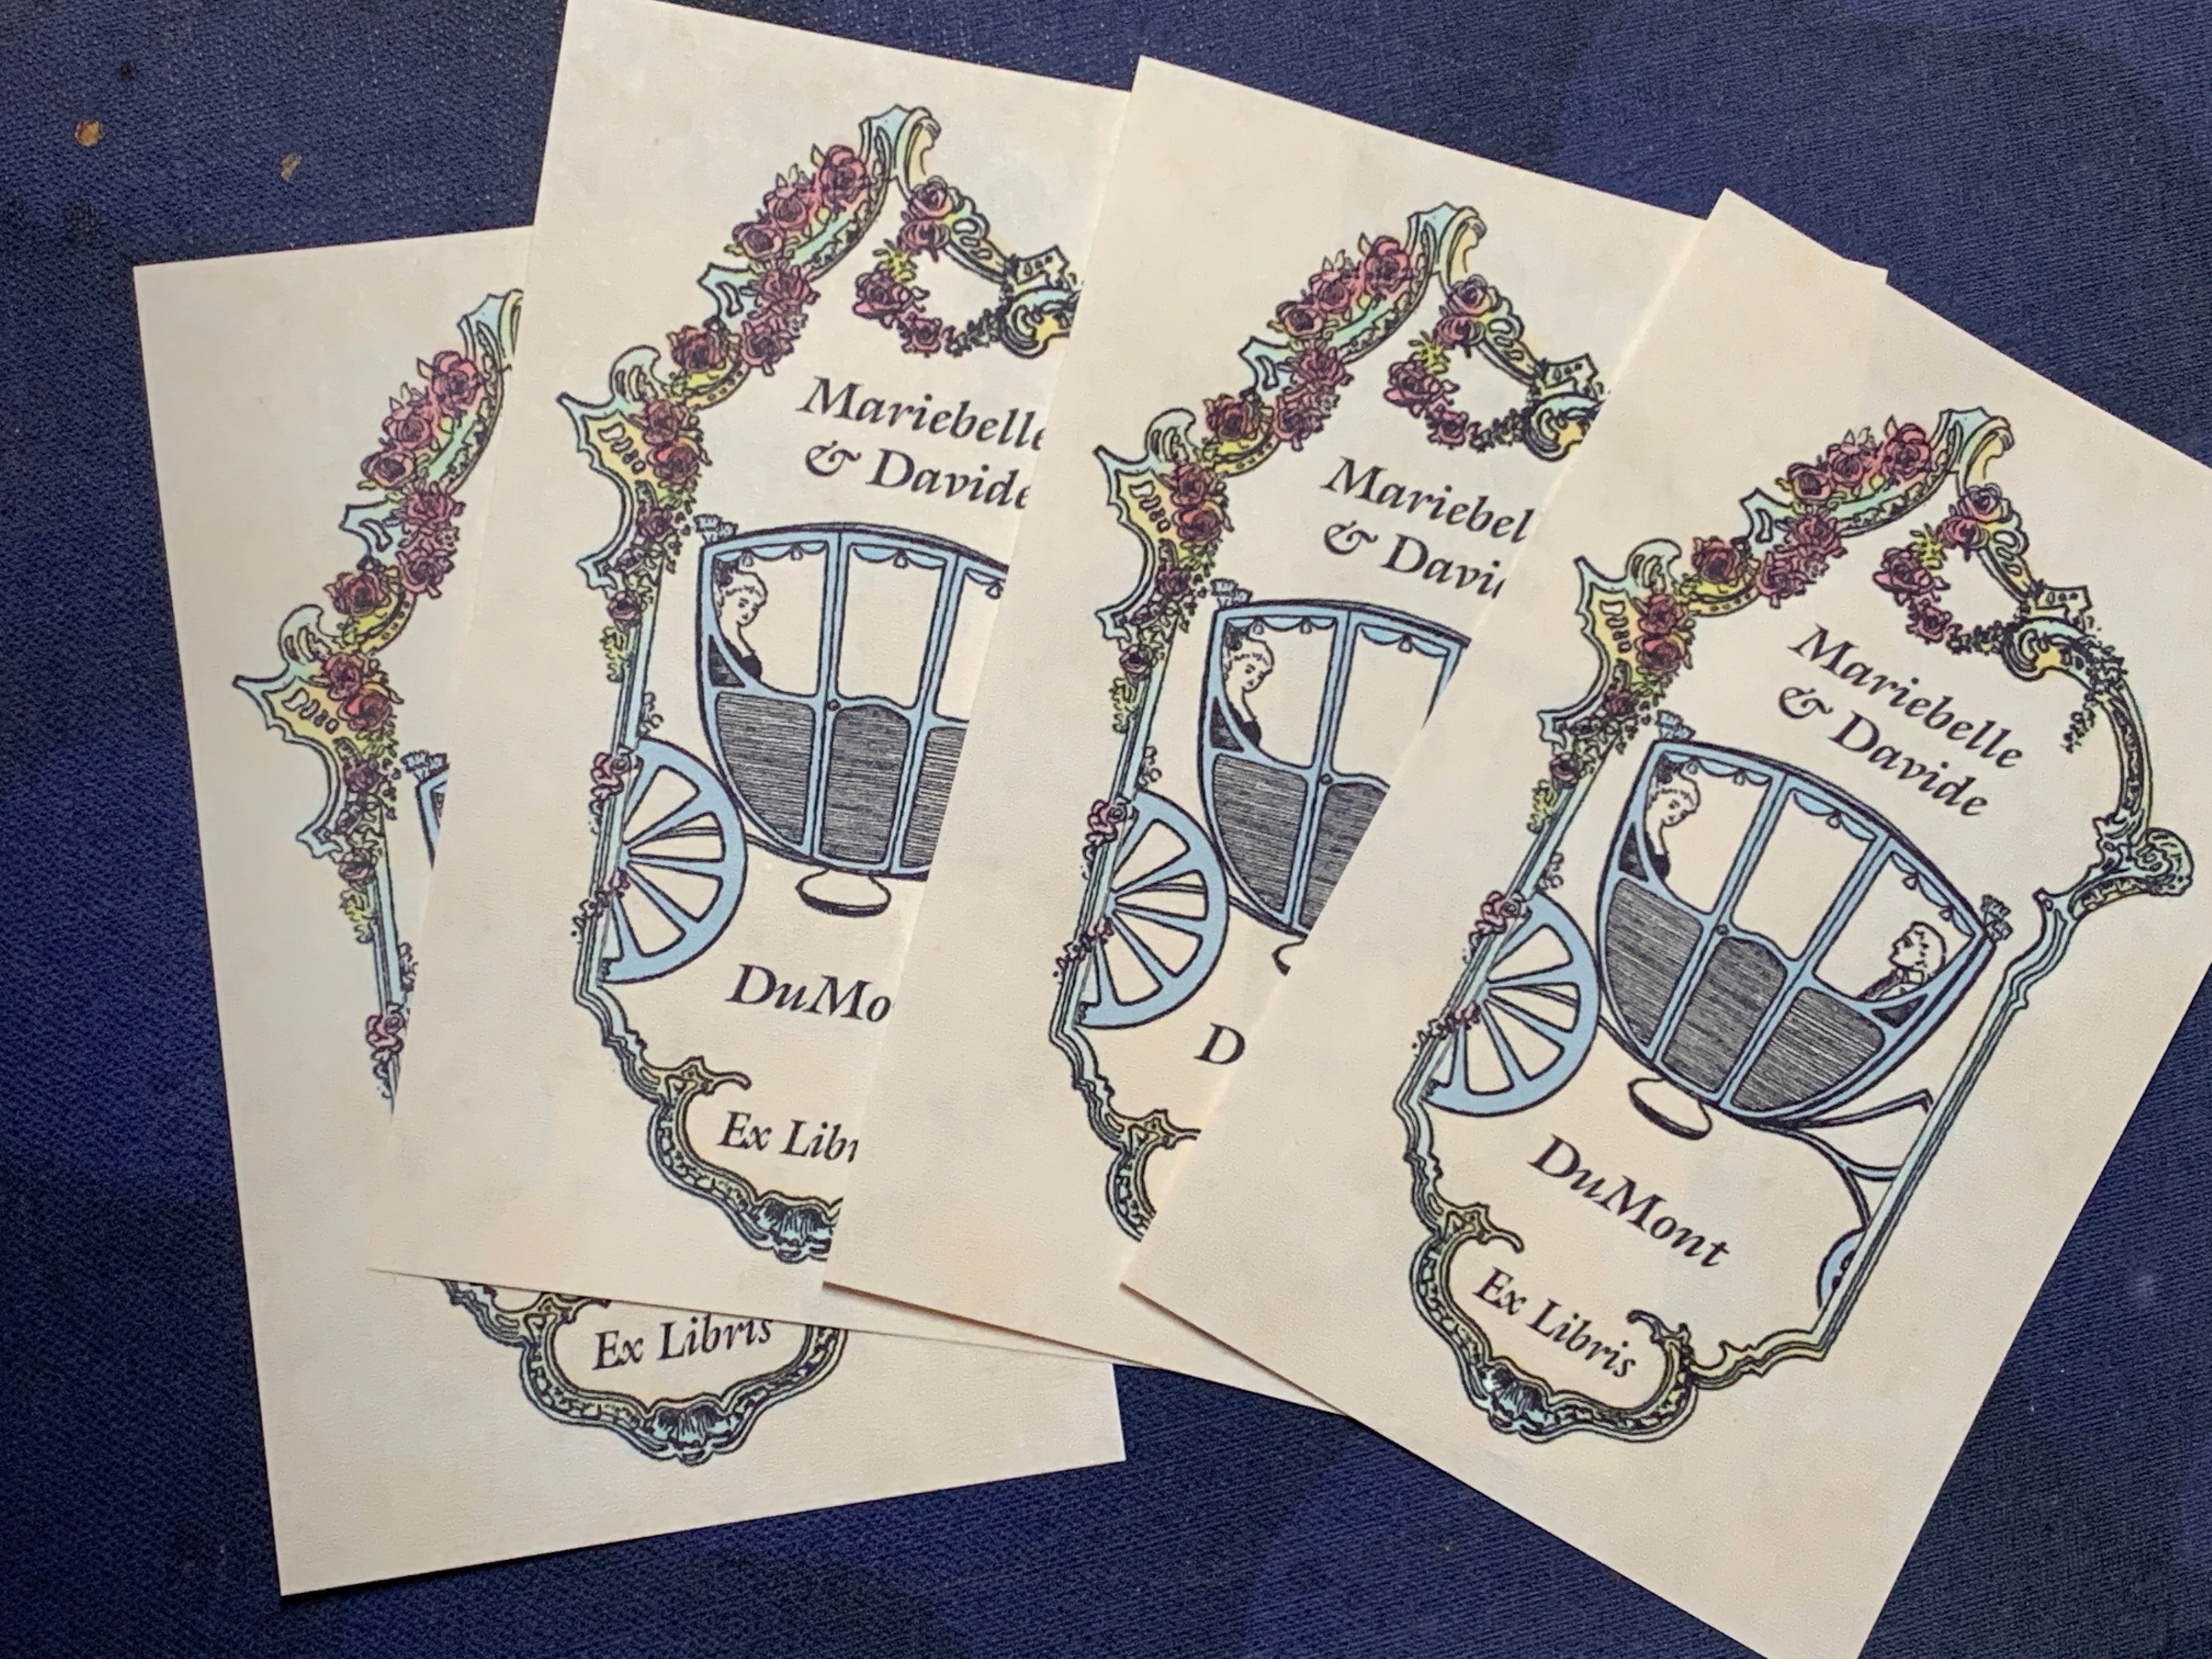 Mr. & Mrs. in Coach, Personalized Ex-Libris Bookplates, Crafted on Traditional Gummed Paper, 2.5in x 4in, Set of 30